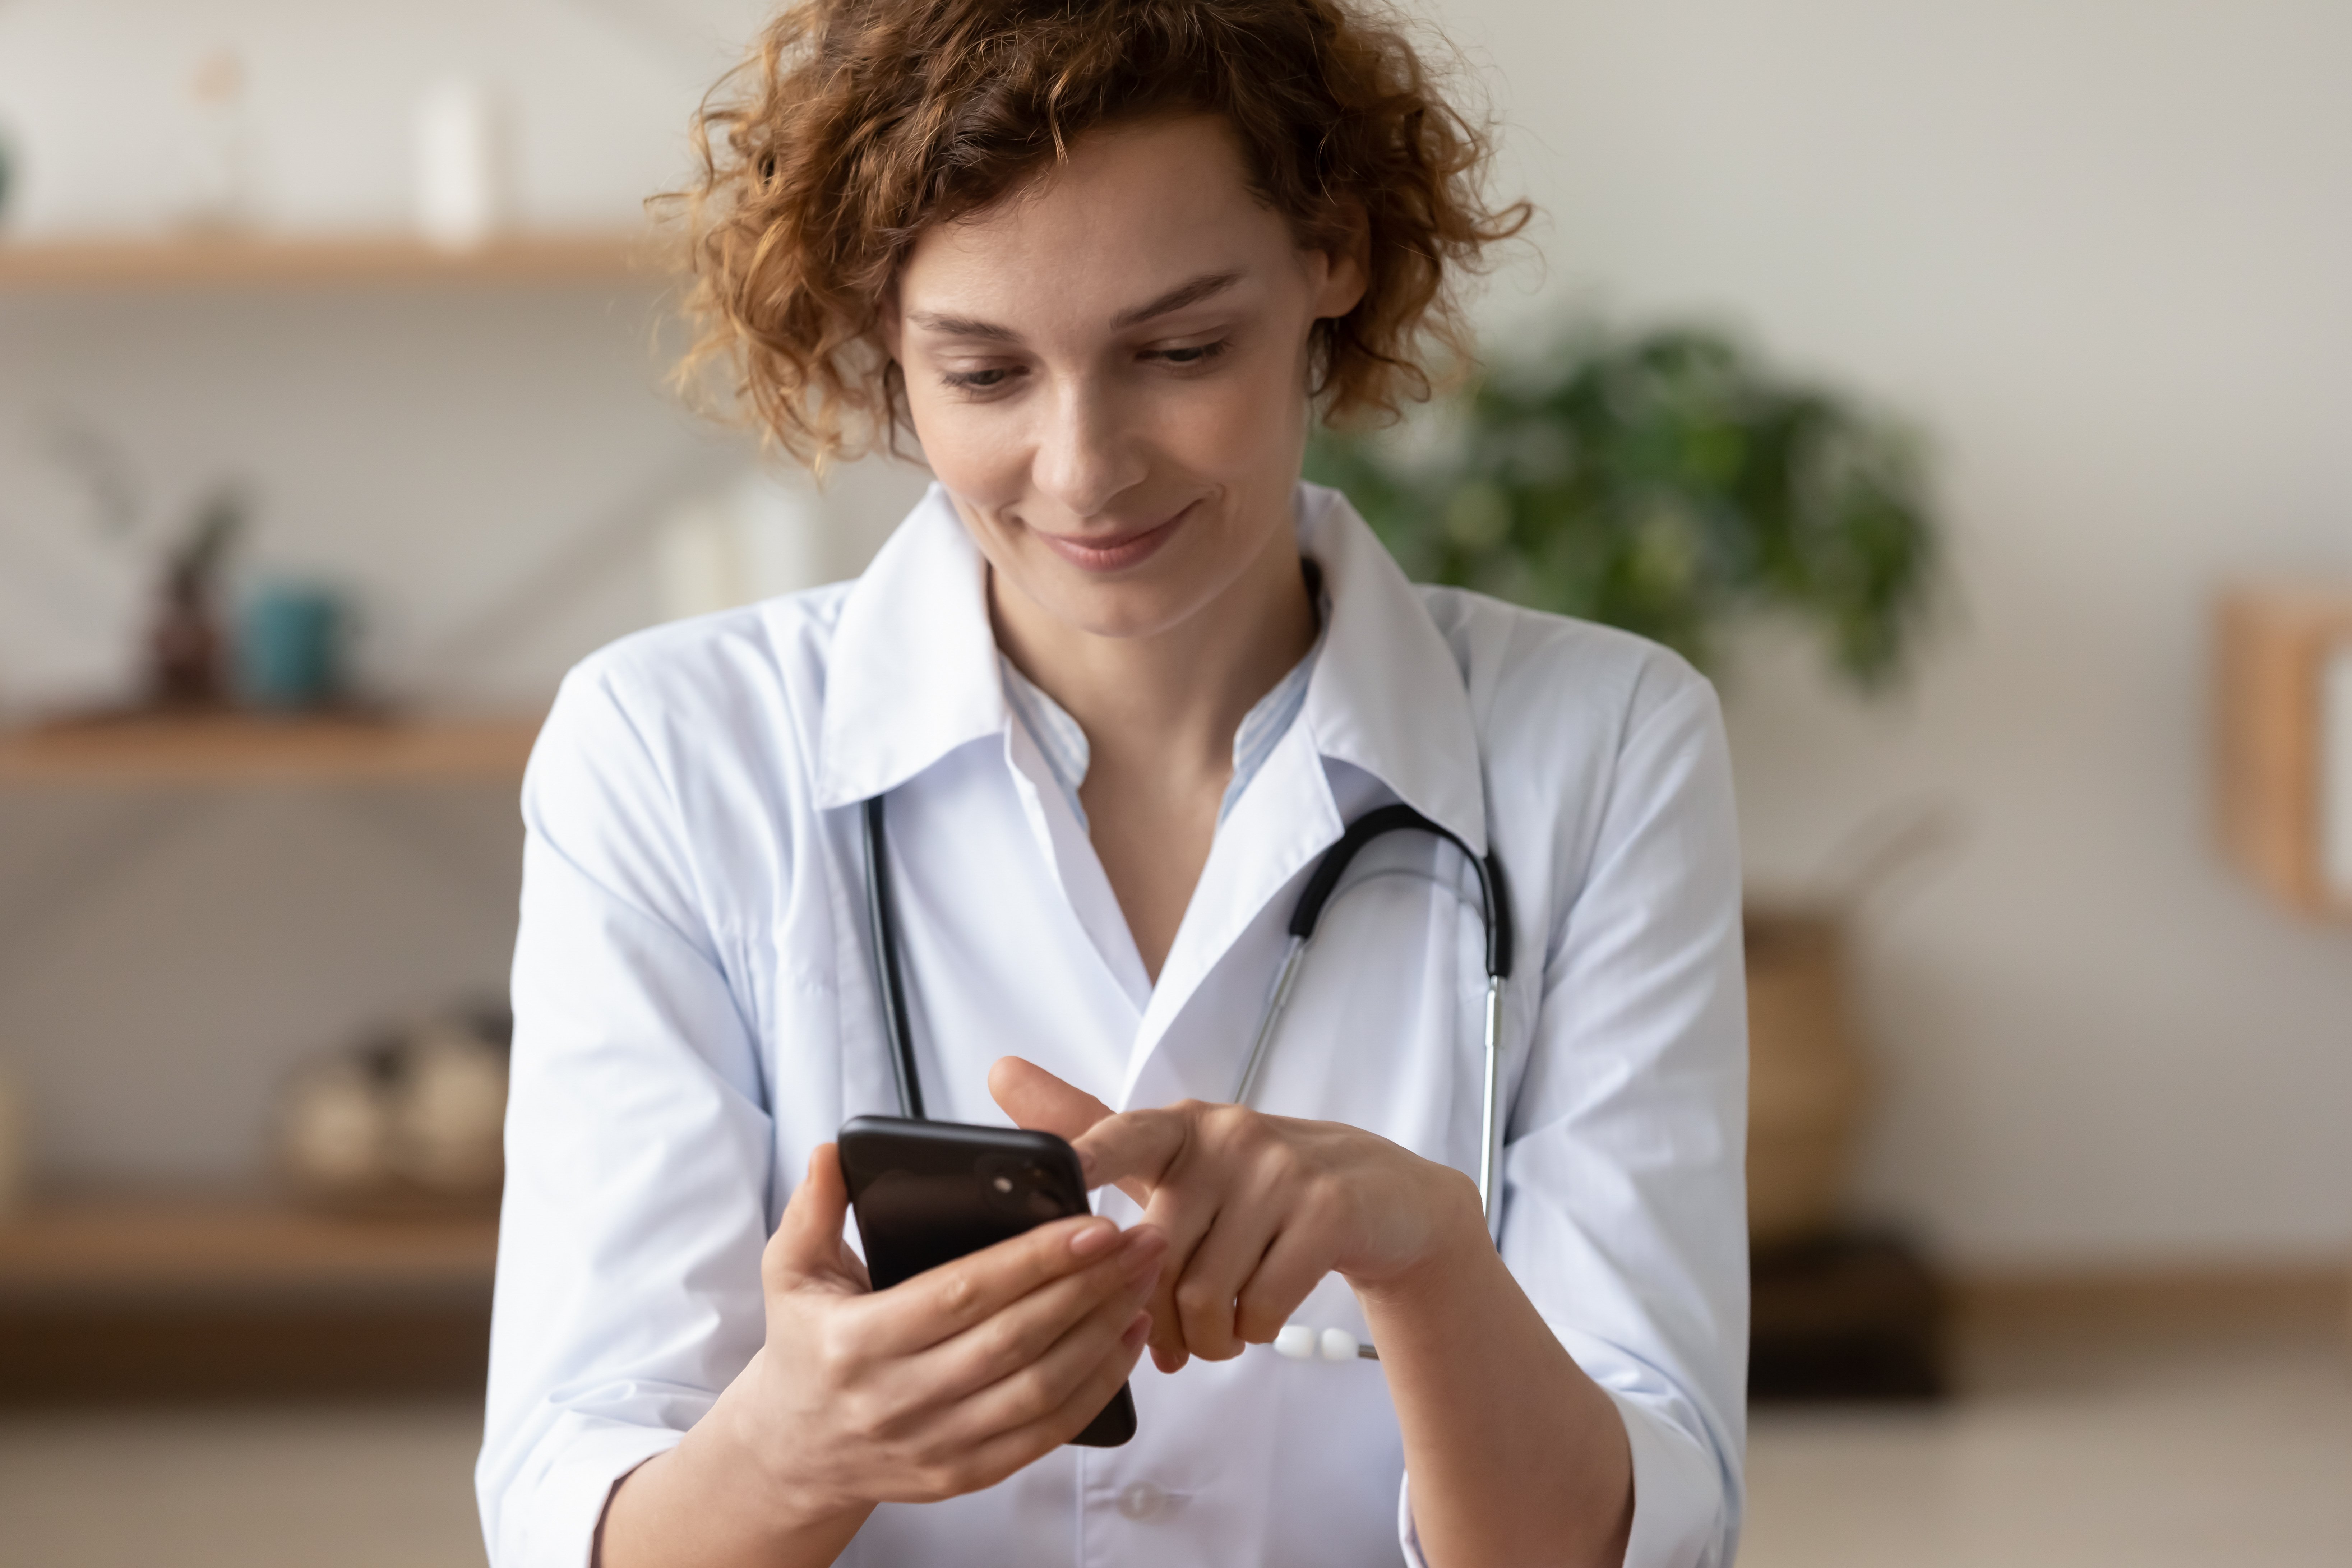 A doctor in a white coat with a stethoscope swipes on her phone.